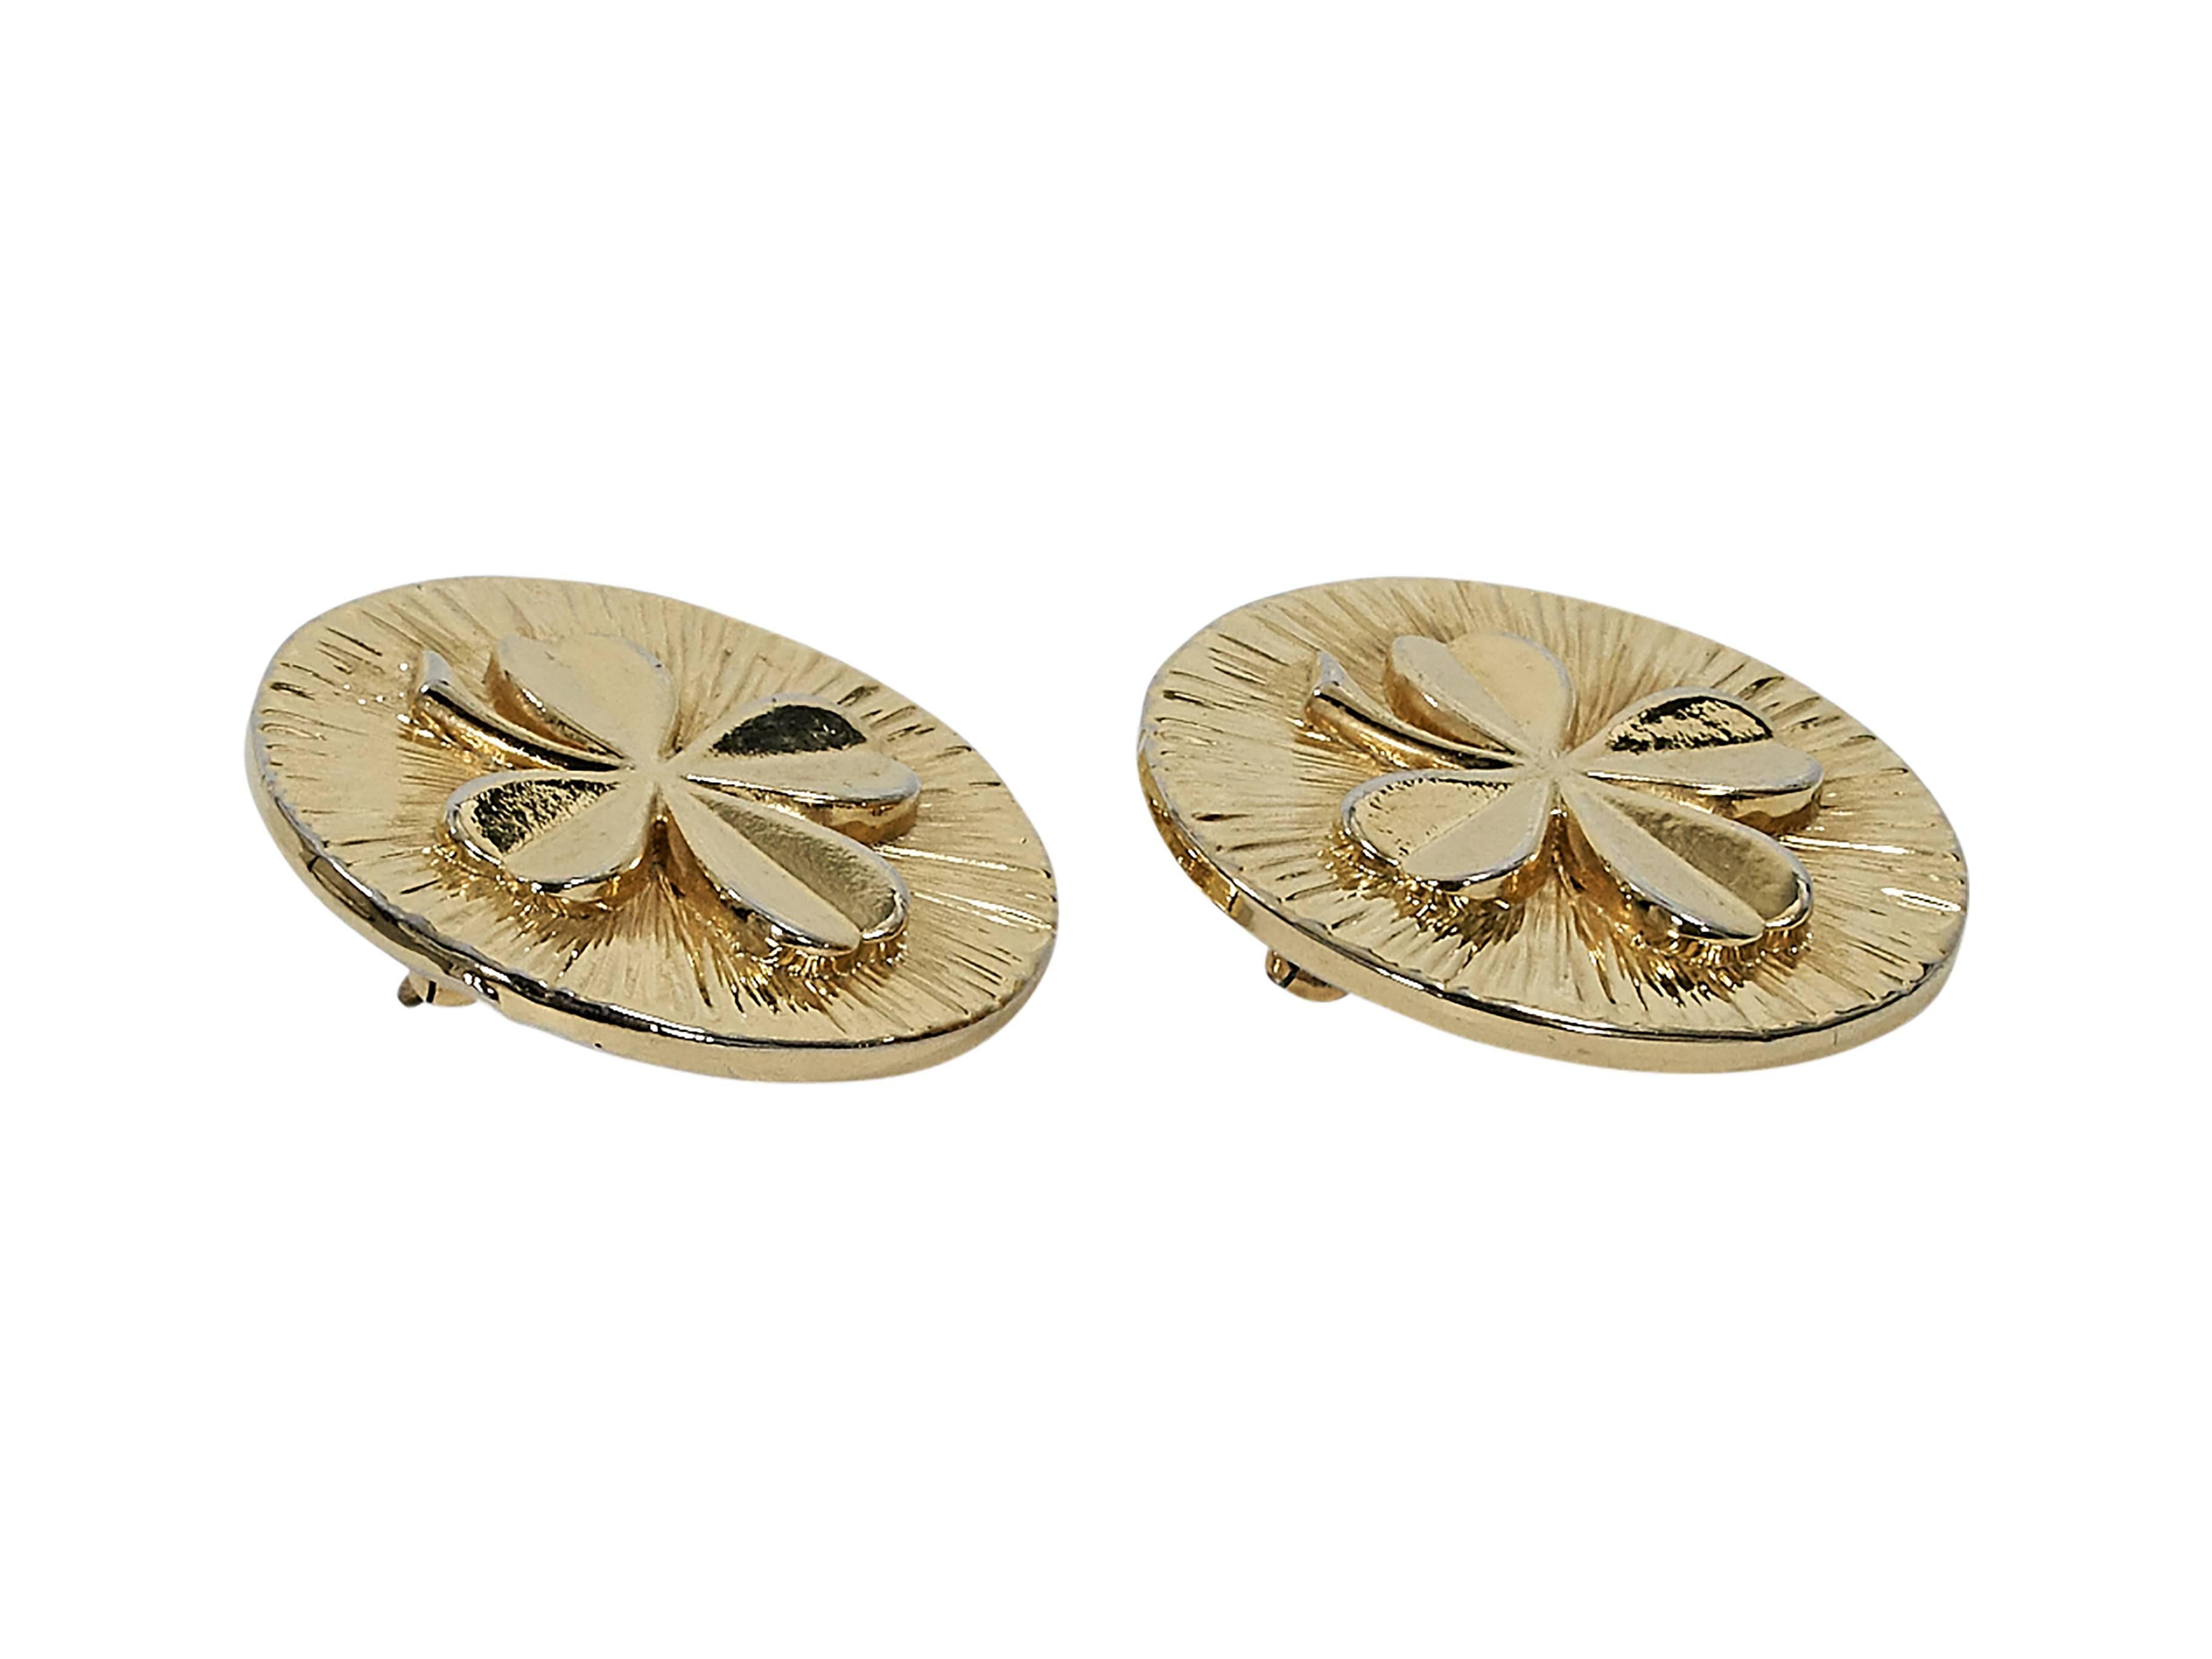 Product details:  Vintage goldtone shamrock earrings by Chanel.  Clip-on backing.  1.5